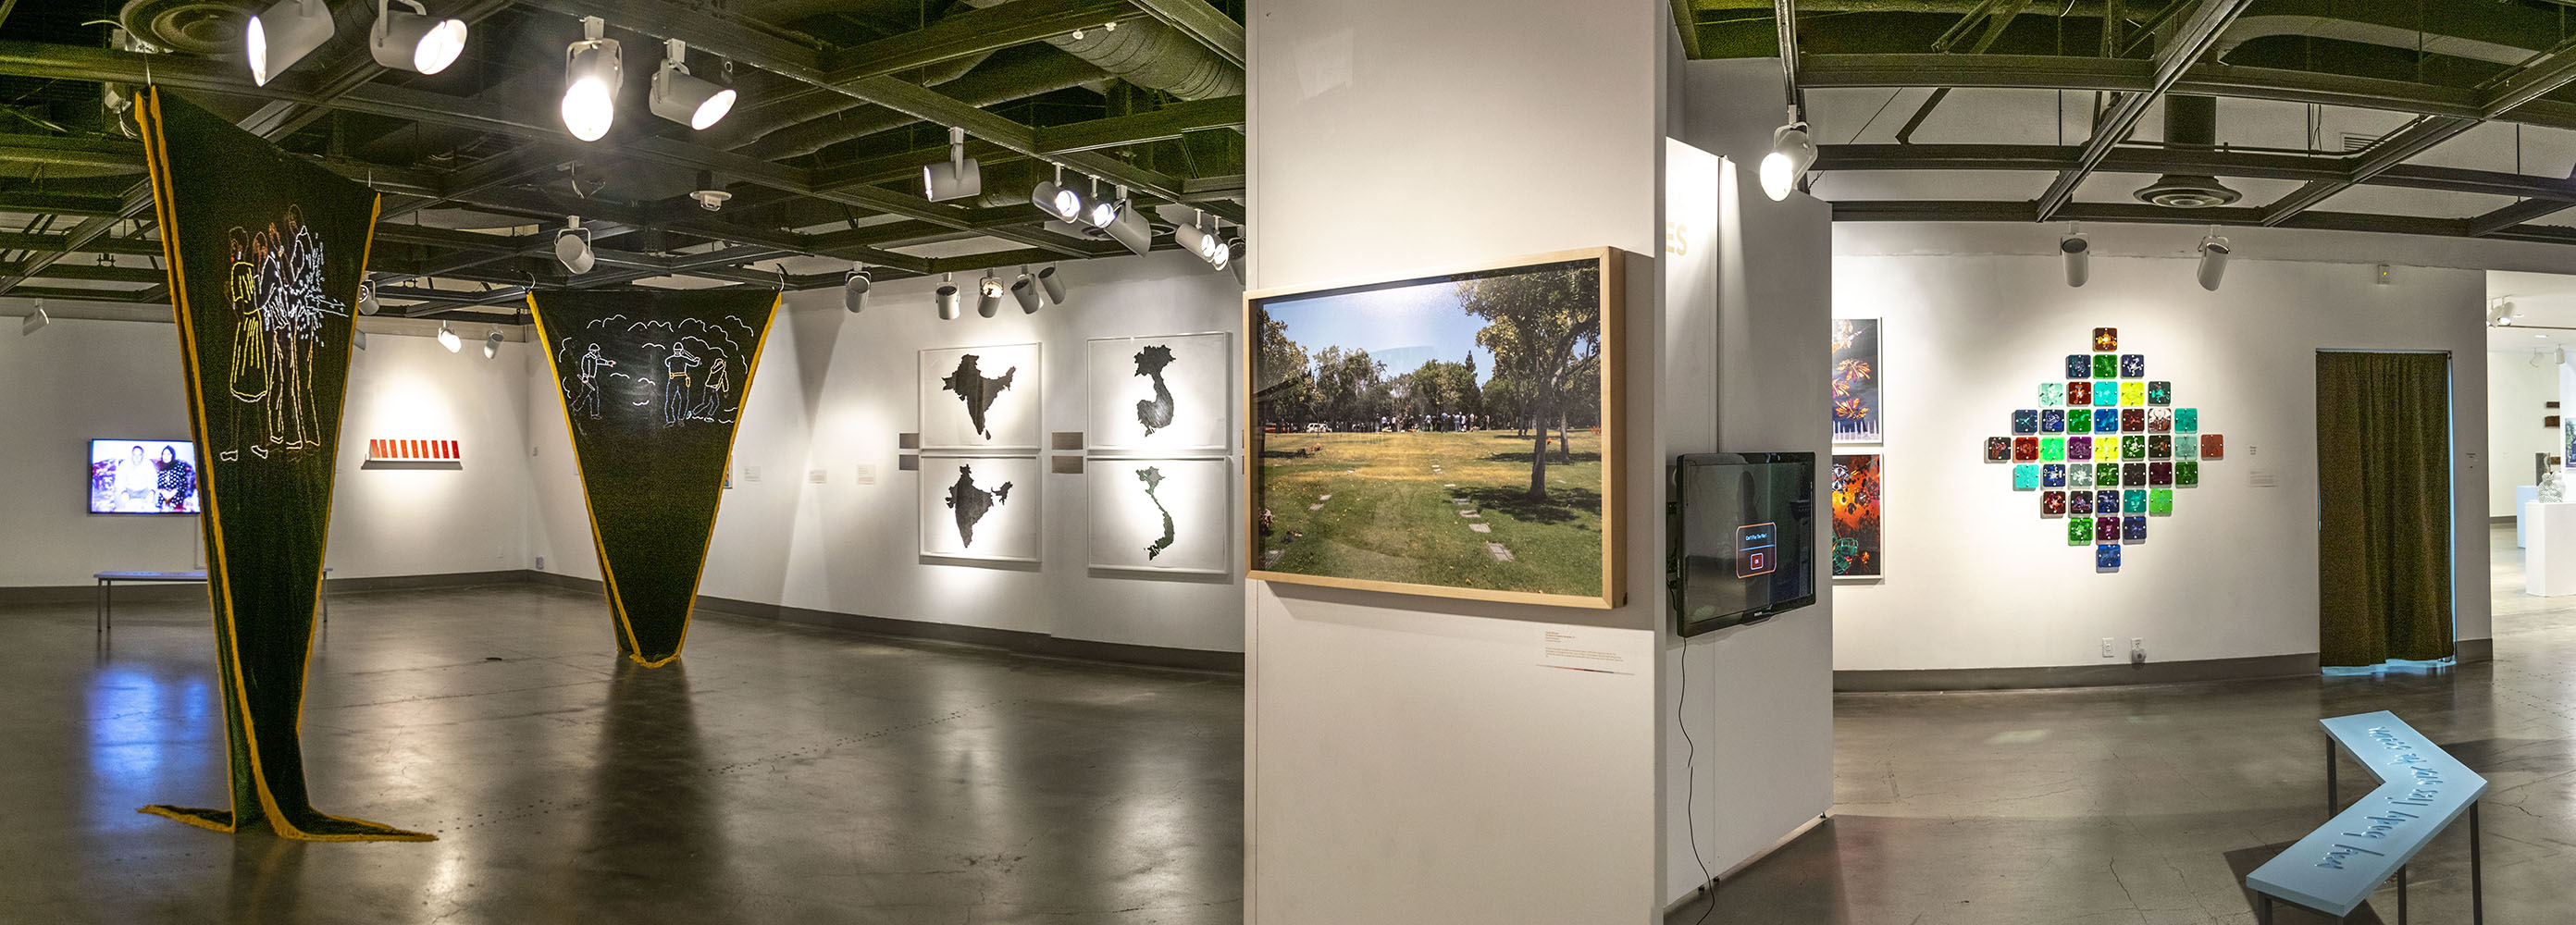 Back view of the gallery, Exhibition: Somewhere In Between, Nov 6, 2018 - Mar 17, 2019,  Co-curated by Michele Cairella Fillmore & Bia Gayotto, W. Keith & Janet Kellogg Art Gallery, Cal Poly Pomona.